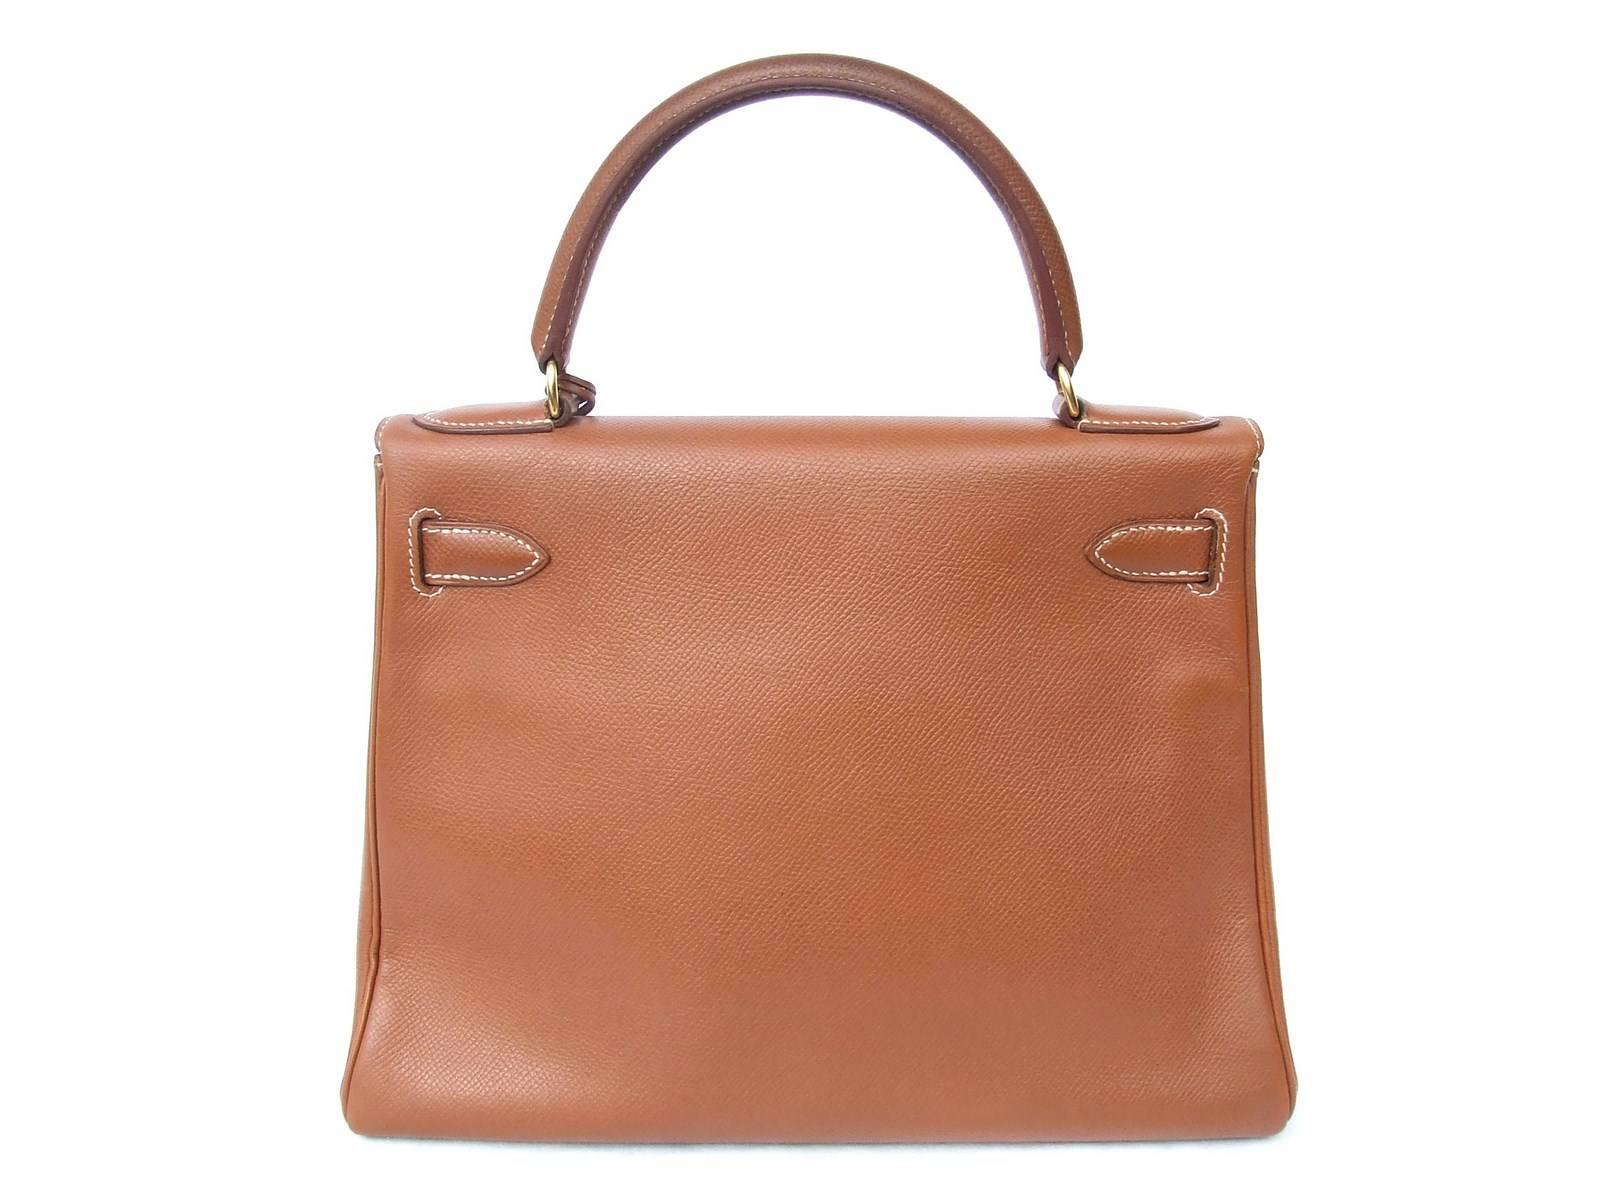 Beautiful Authentic Hermes Bag

KELLY retourne (sewn upside down and returned)

Made in France

Stamp V in a circle

Made of Epsom Leather, Golden Hardware, White Stitching

Colorway: Gold

Lined with smooth gold leather, suedine in the